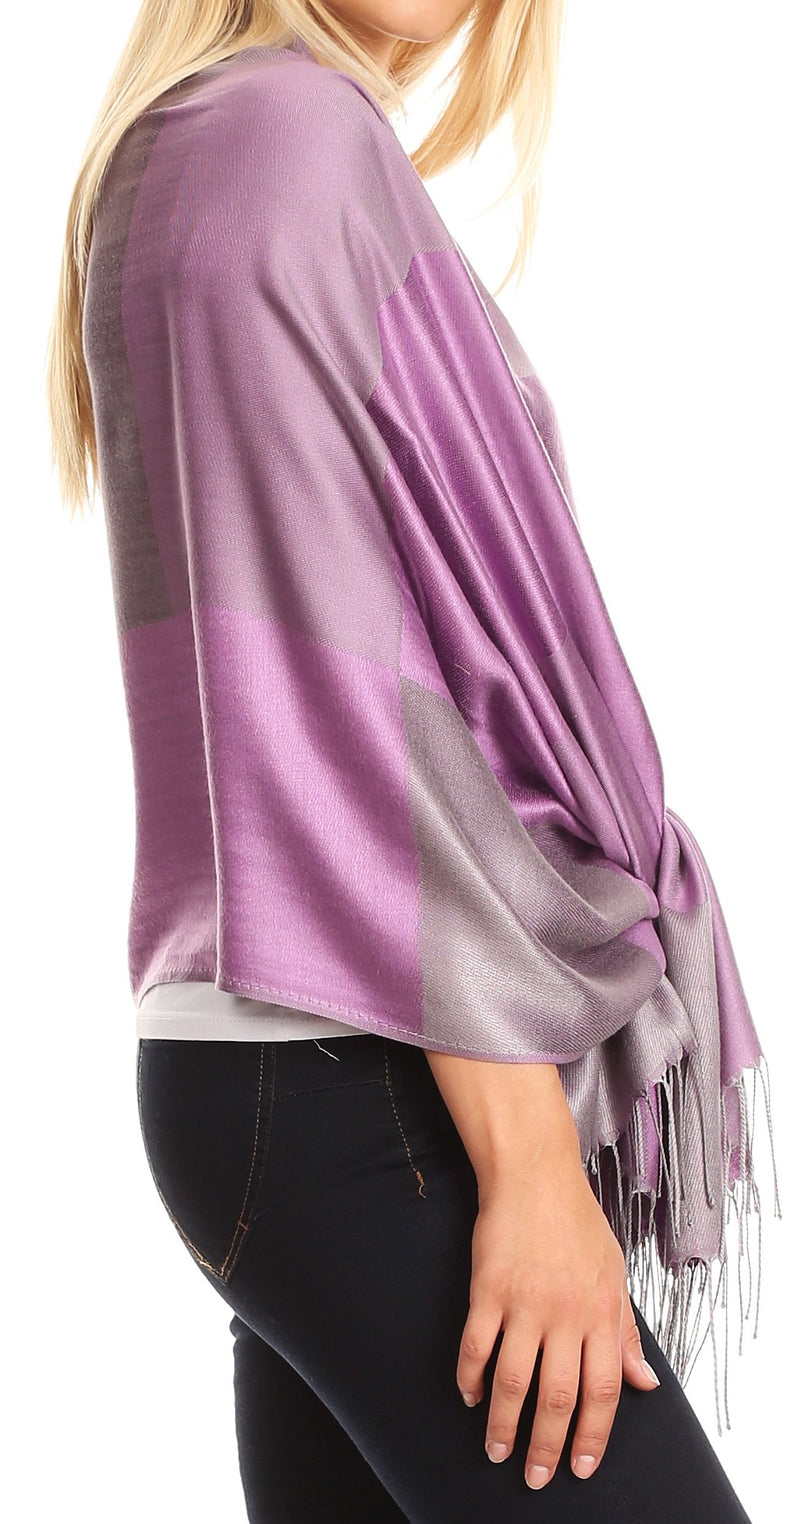 Sakkas Nicola Reversible Warm and Soft Unisex Scarf Stole Wrap Solid Color-block